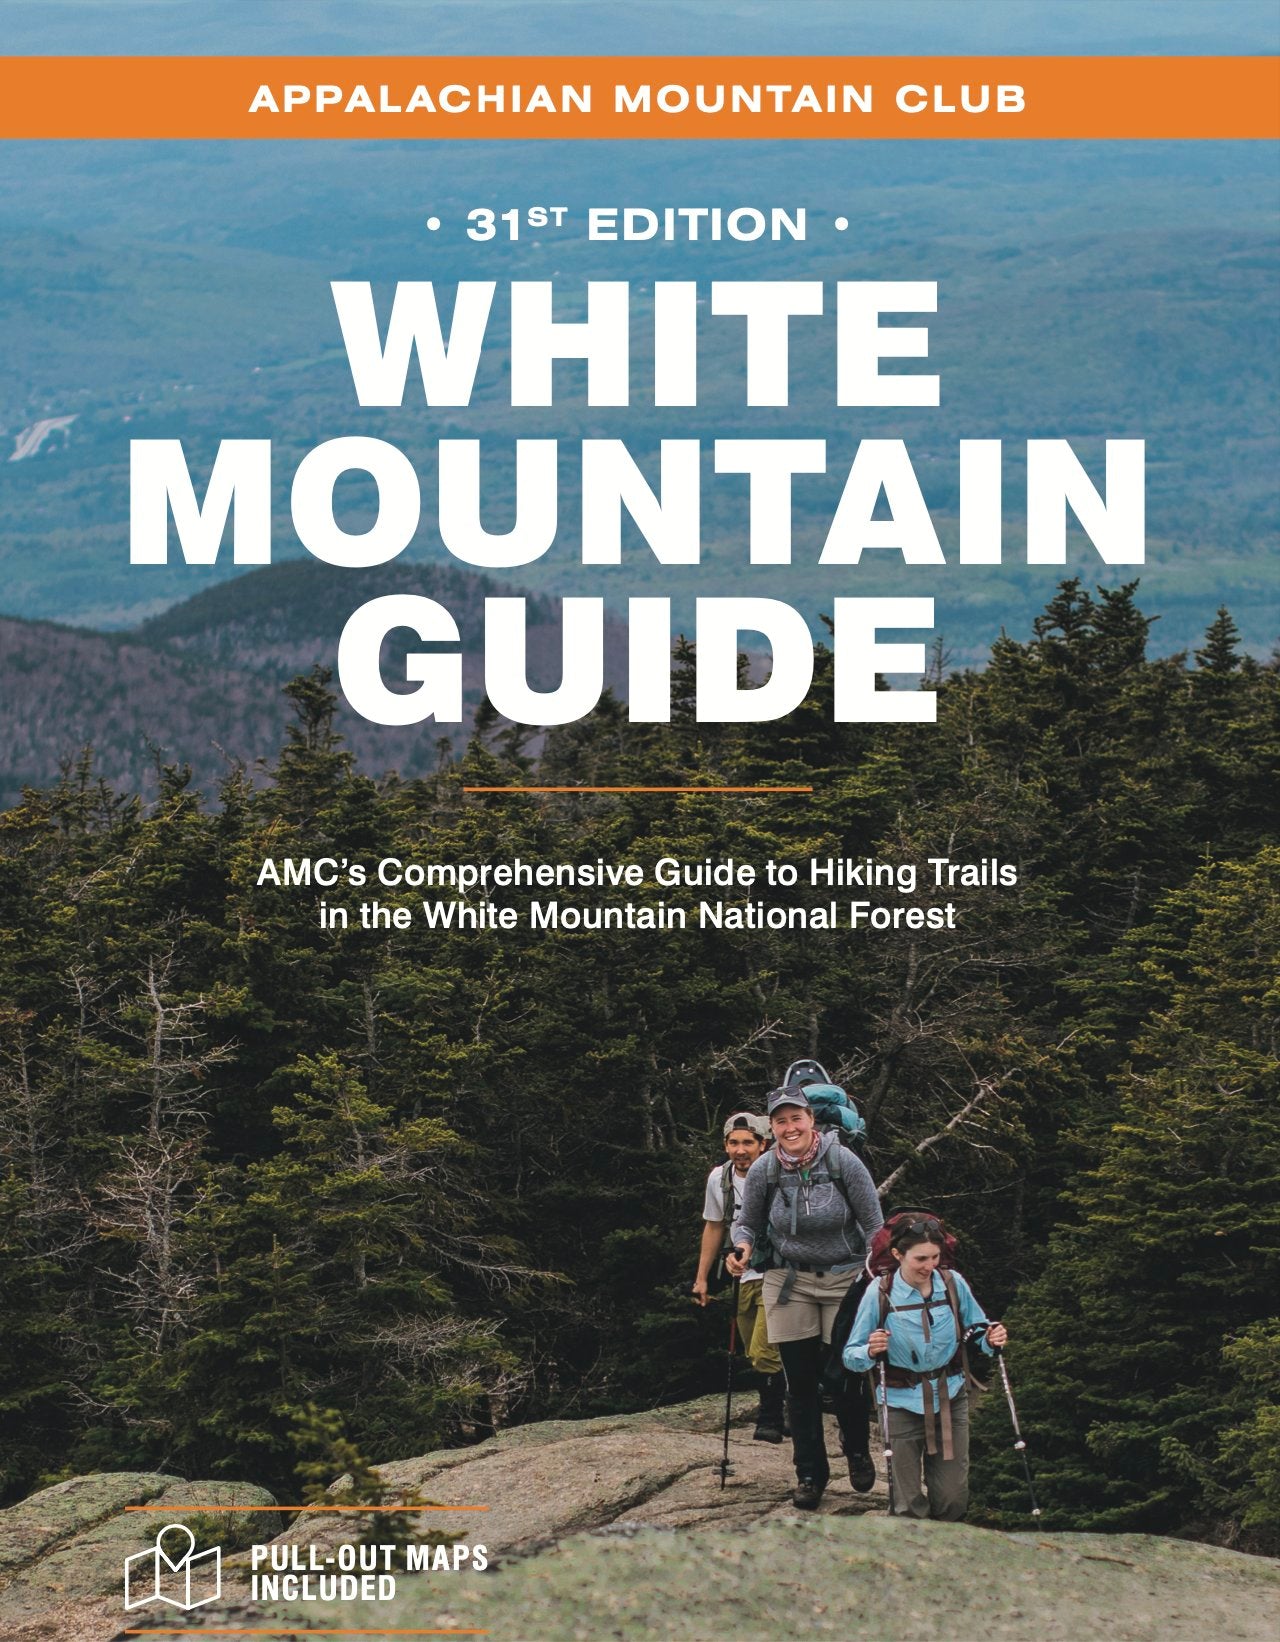 White Mountain Guide: AMC's Comprehensive Guide to Hiking Trails in the White Mountain National Forest, 31st Edition